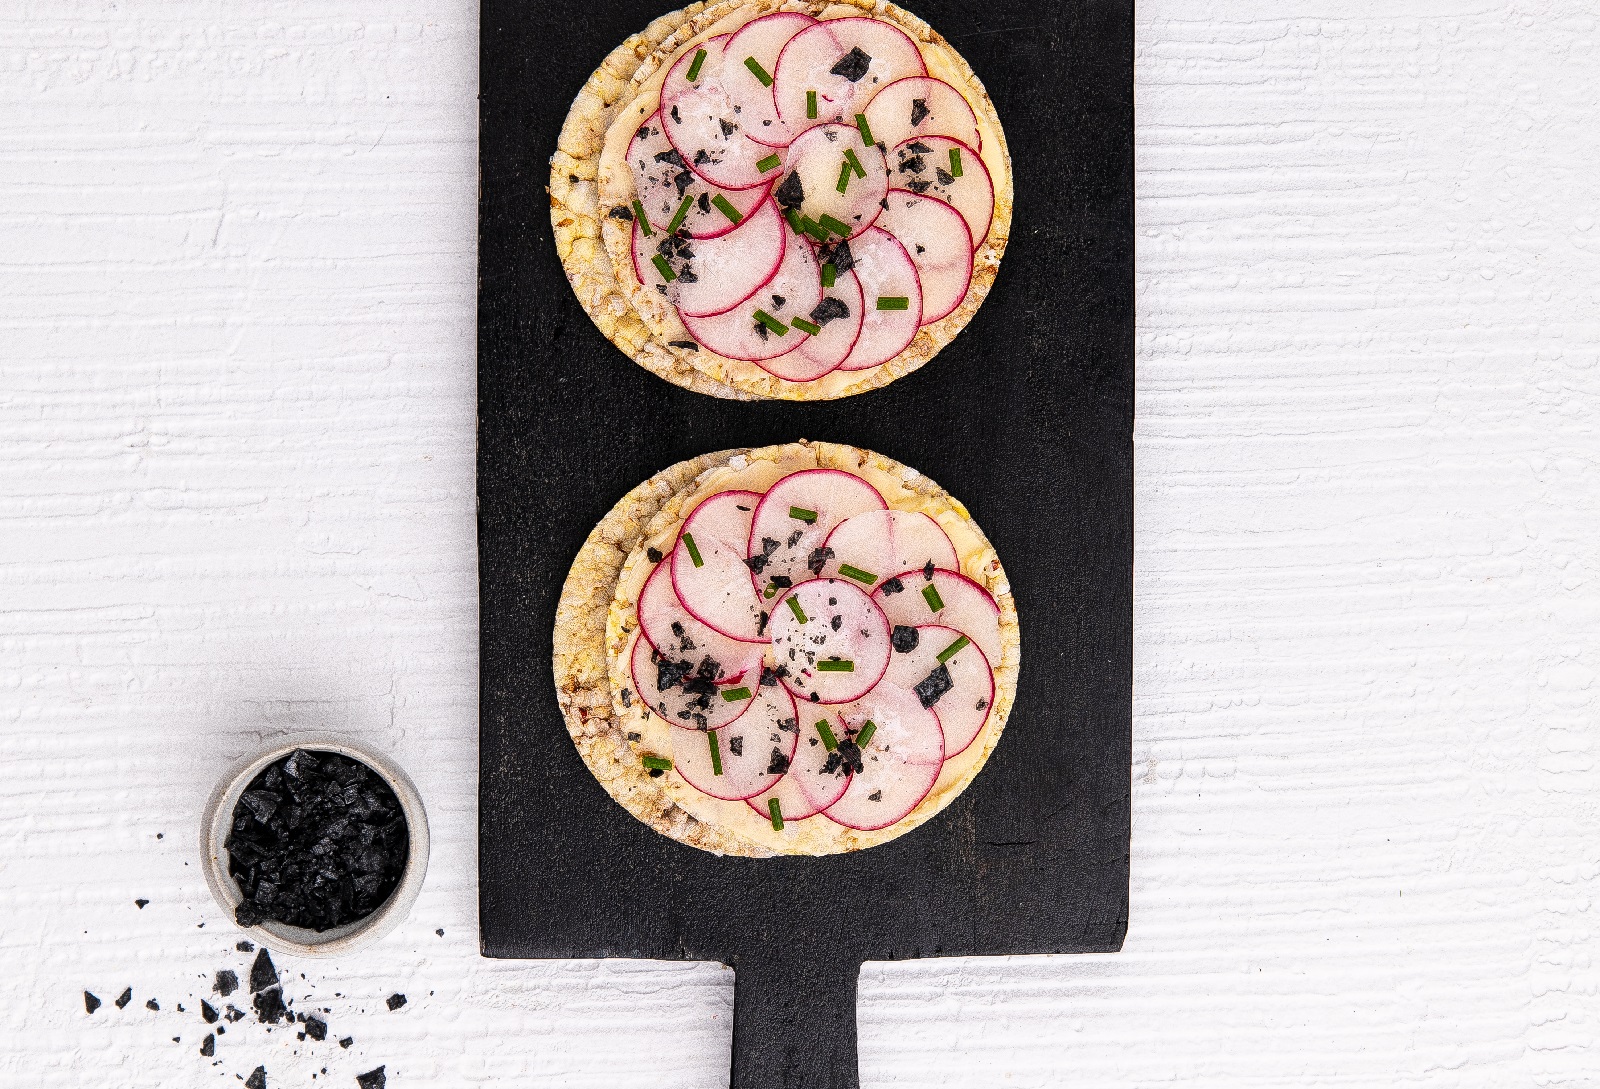 Butter, Radish & Chives on Corn Thins slices as a light vegetarian snack